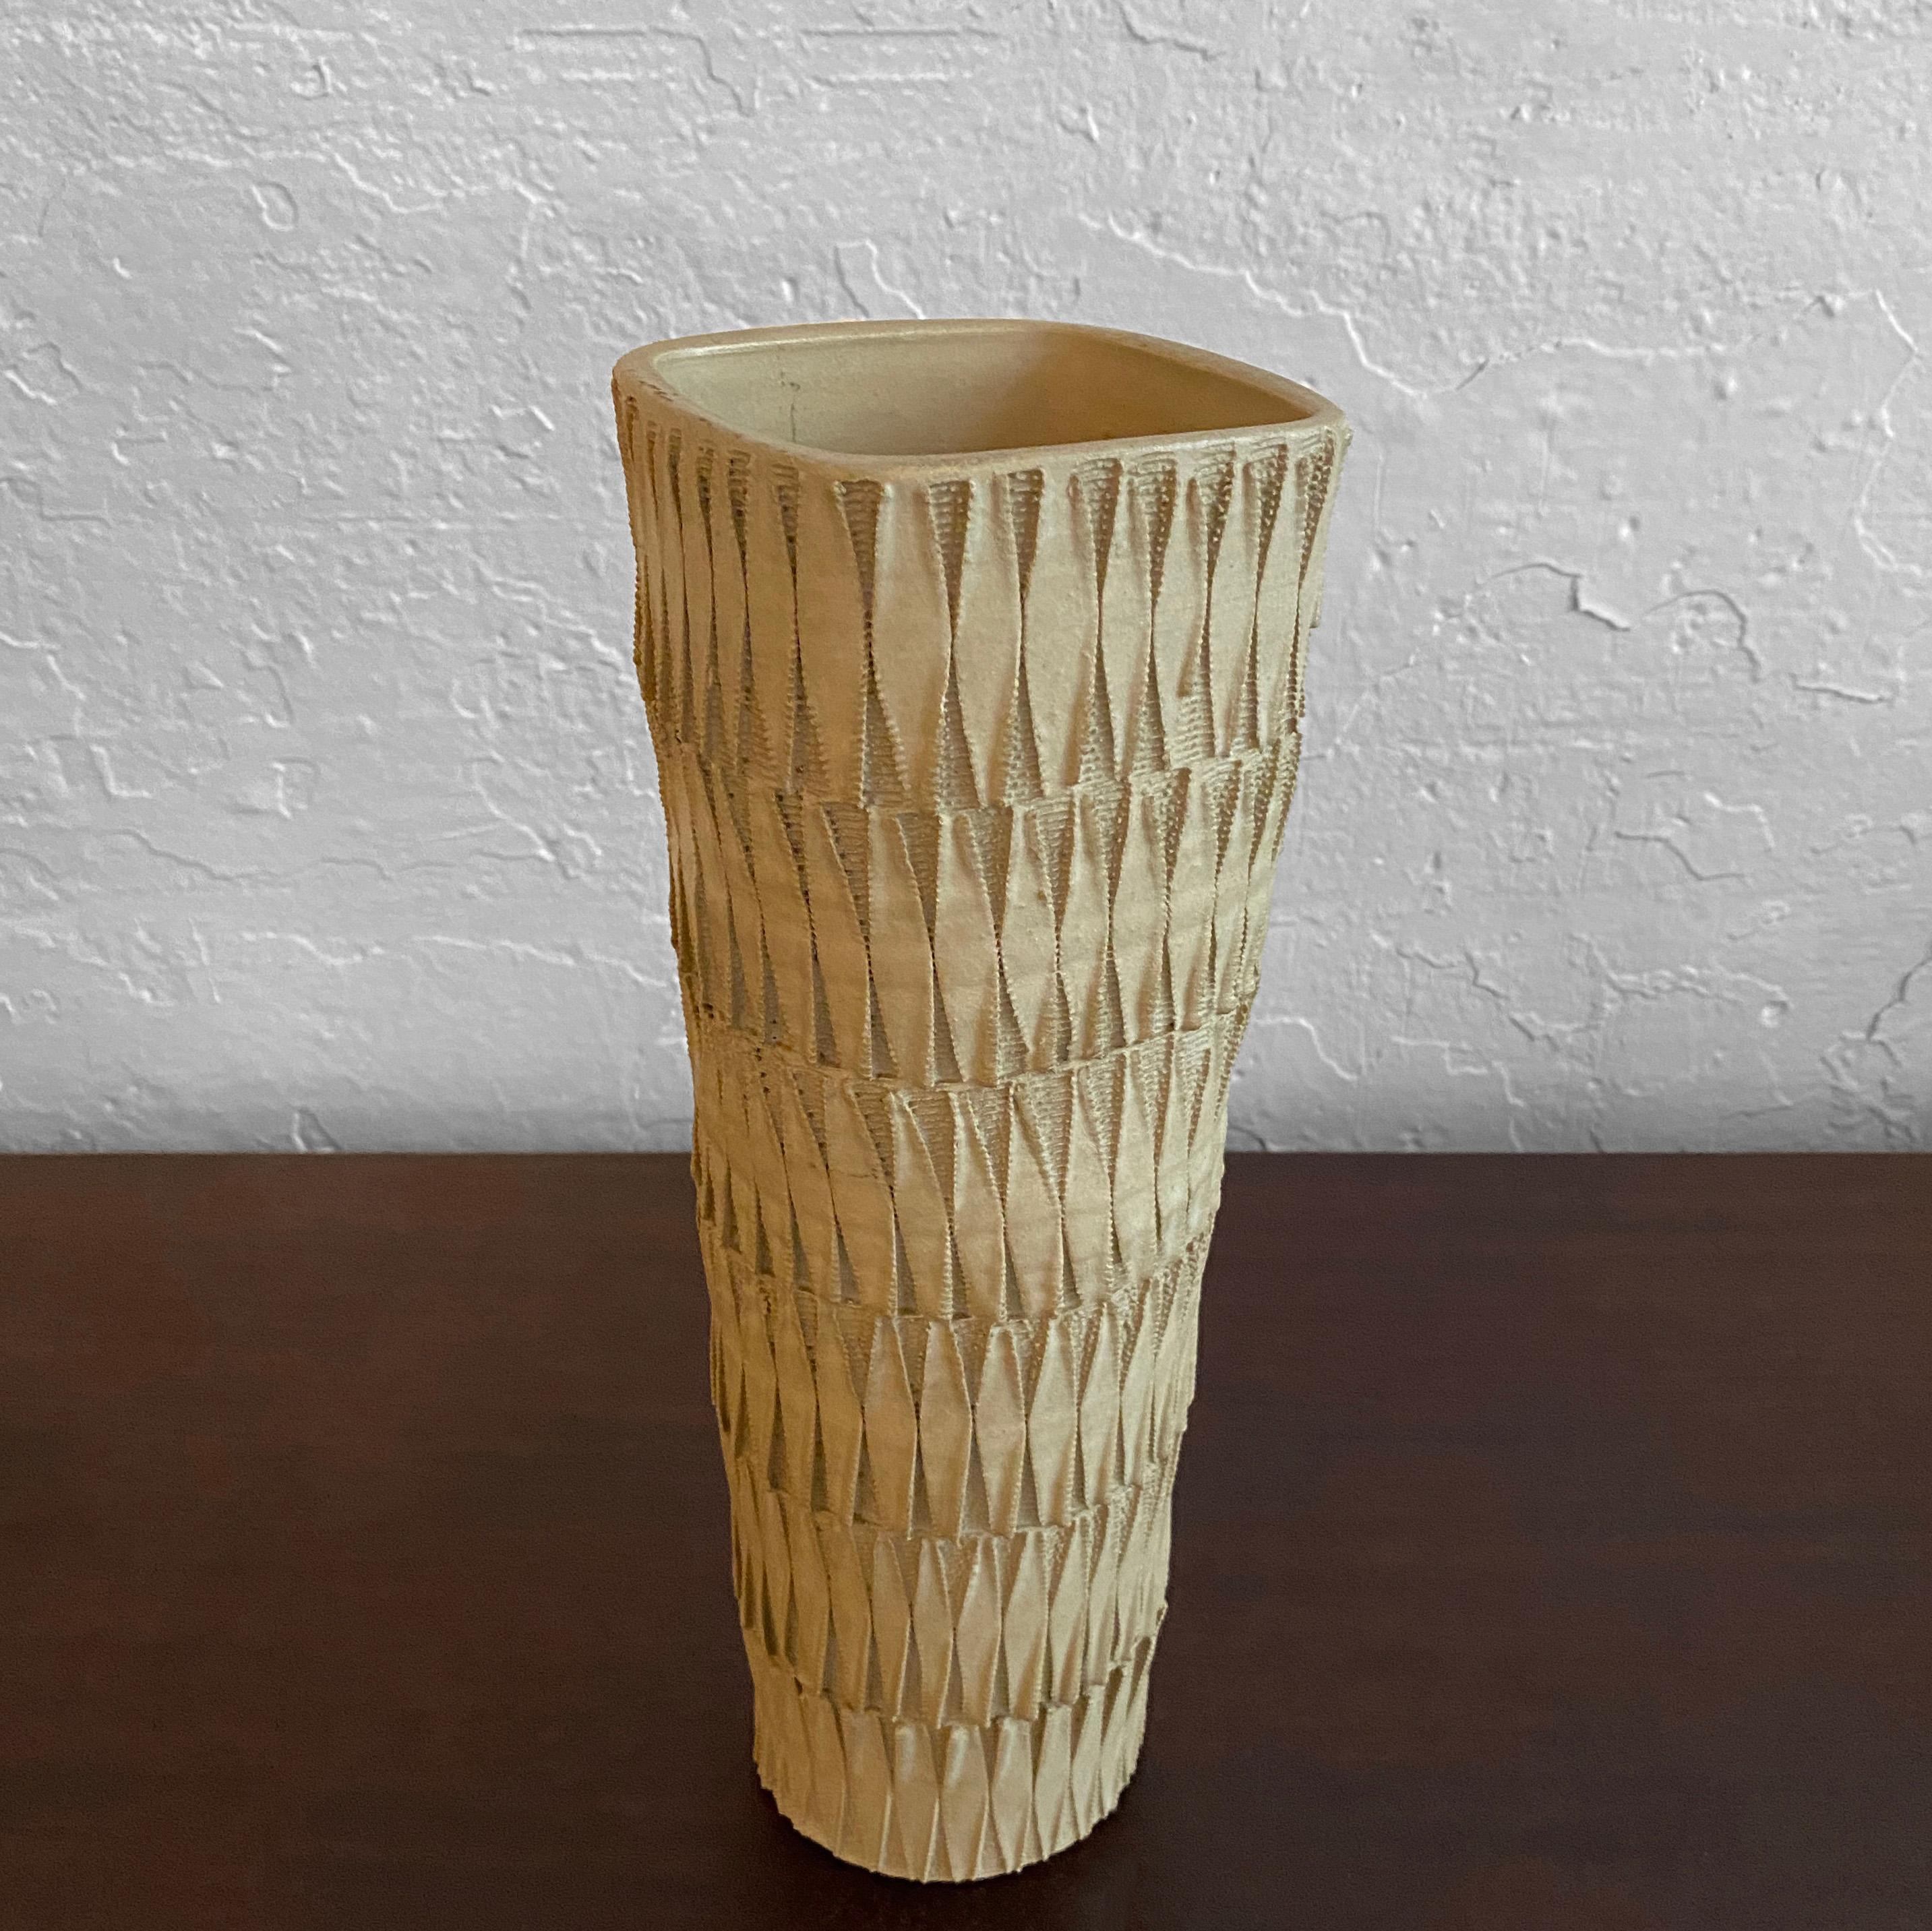 Interesting, midcentury, Japanese, matte tan, earthenware, art pottery vase features a tapered body, intricately carved and incised in a leaf pattern with Japanese markings on it's underside.